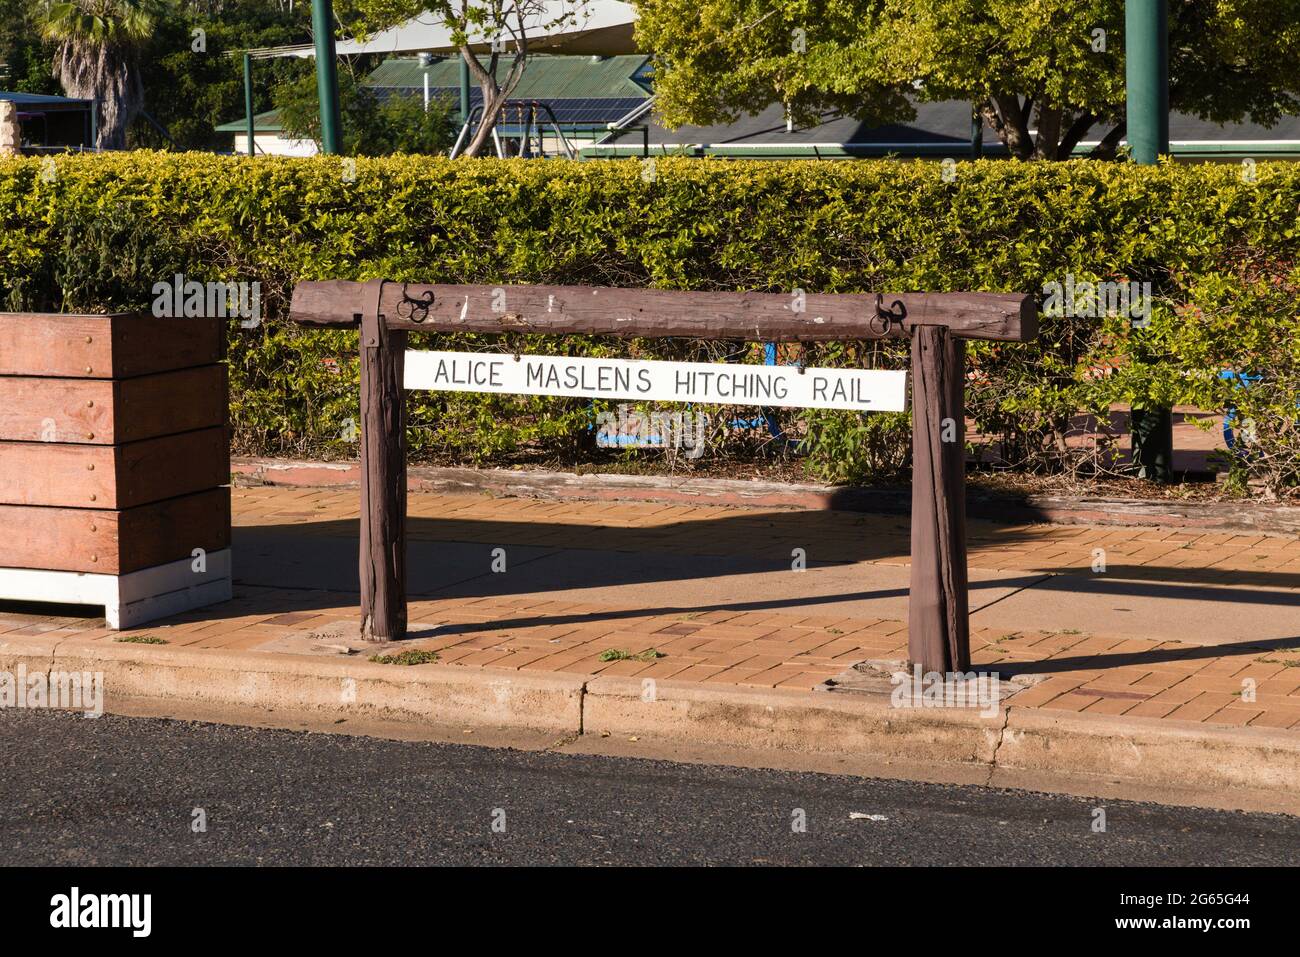 The Alice Maslen's Hitching Rail is located in the main street of Eidsvold Queensland Australia Stock Photo